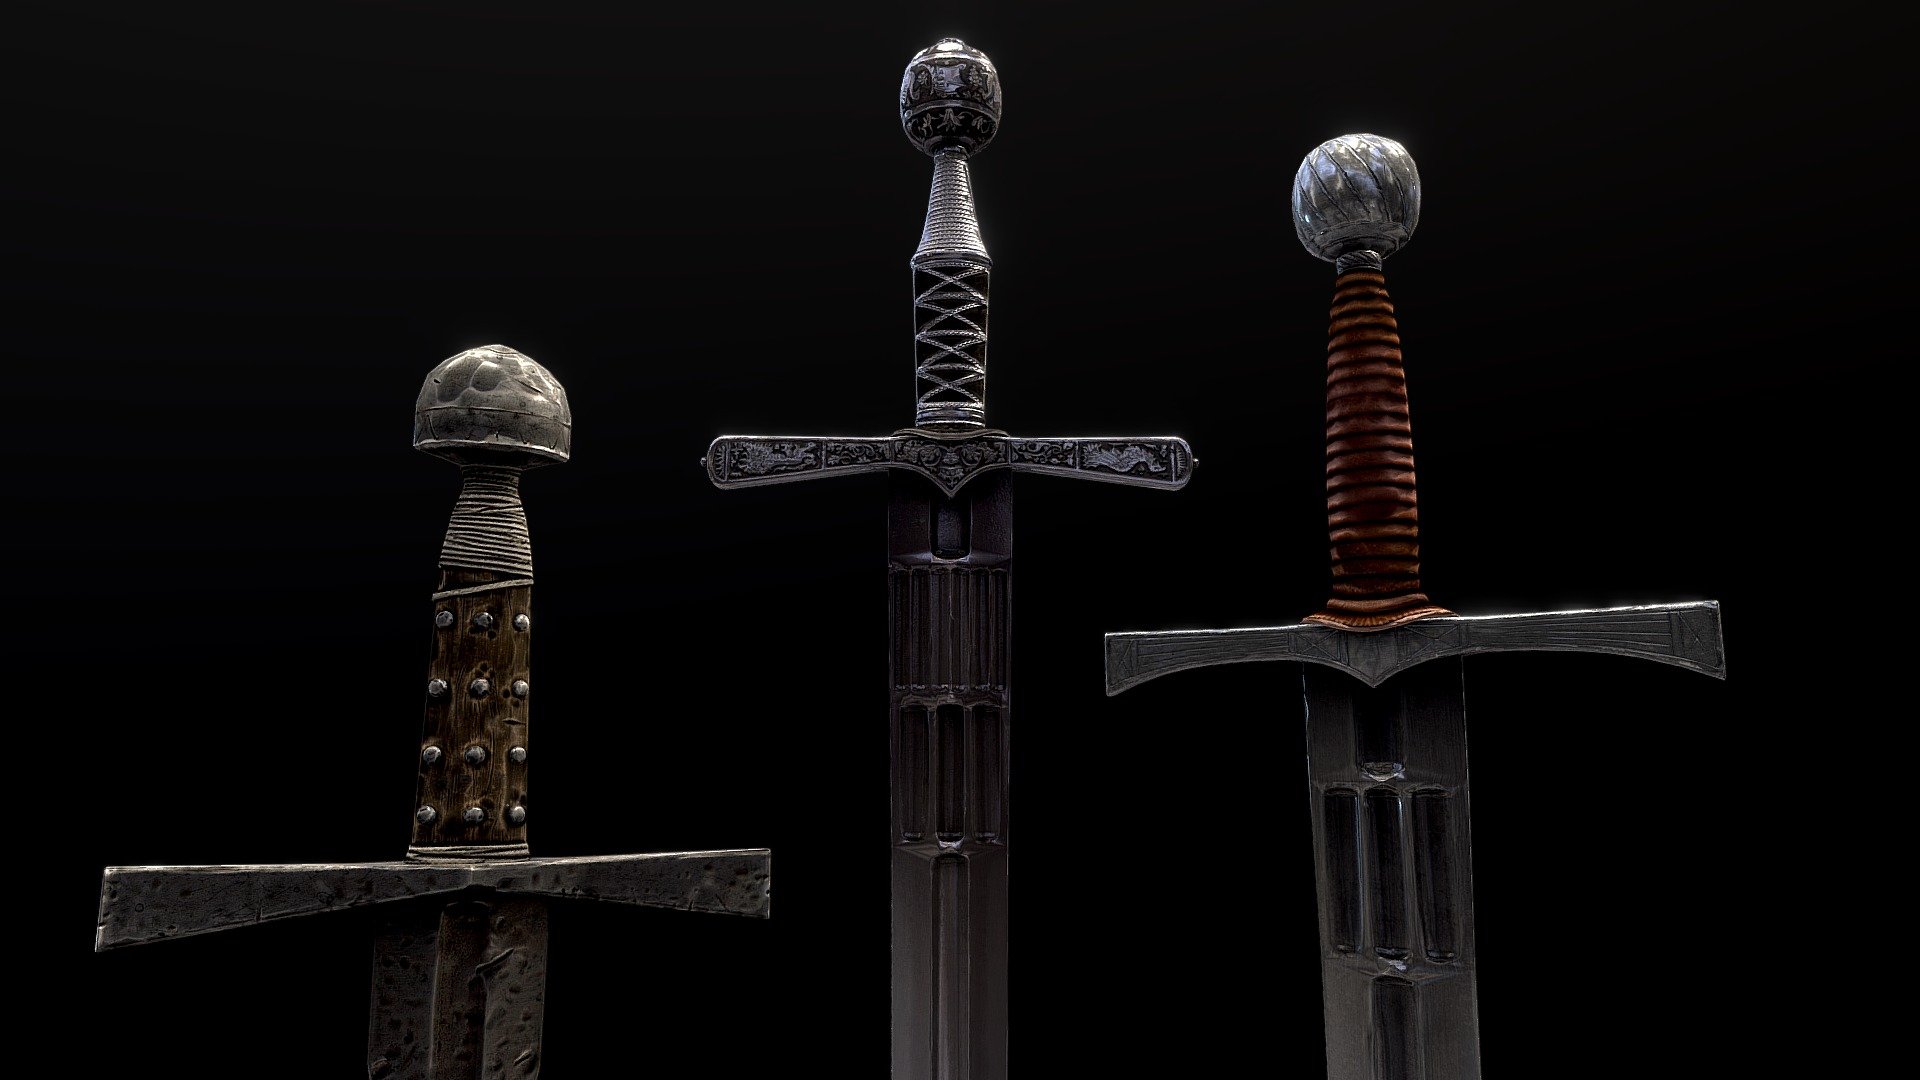 Cross Guard Sword: Sword Skin for Chivalry 2

3 teirs of swords availible in Chivalry 2 customization.
Custom engravings on tier 3, these are my fav part of the swords and are drawn by hand with pen and ink ontop of printed out UV's scanned and then embossed, they feature the Agathian lion and Mason eagles fighting over the crossguard symbolic of their fight for the crown. fun stuff! - Cross Guard Sword: Sword Skin for Chivalry 2 - 3D model by MattMakesSwords (@frankthefish) 3d model